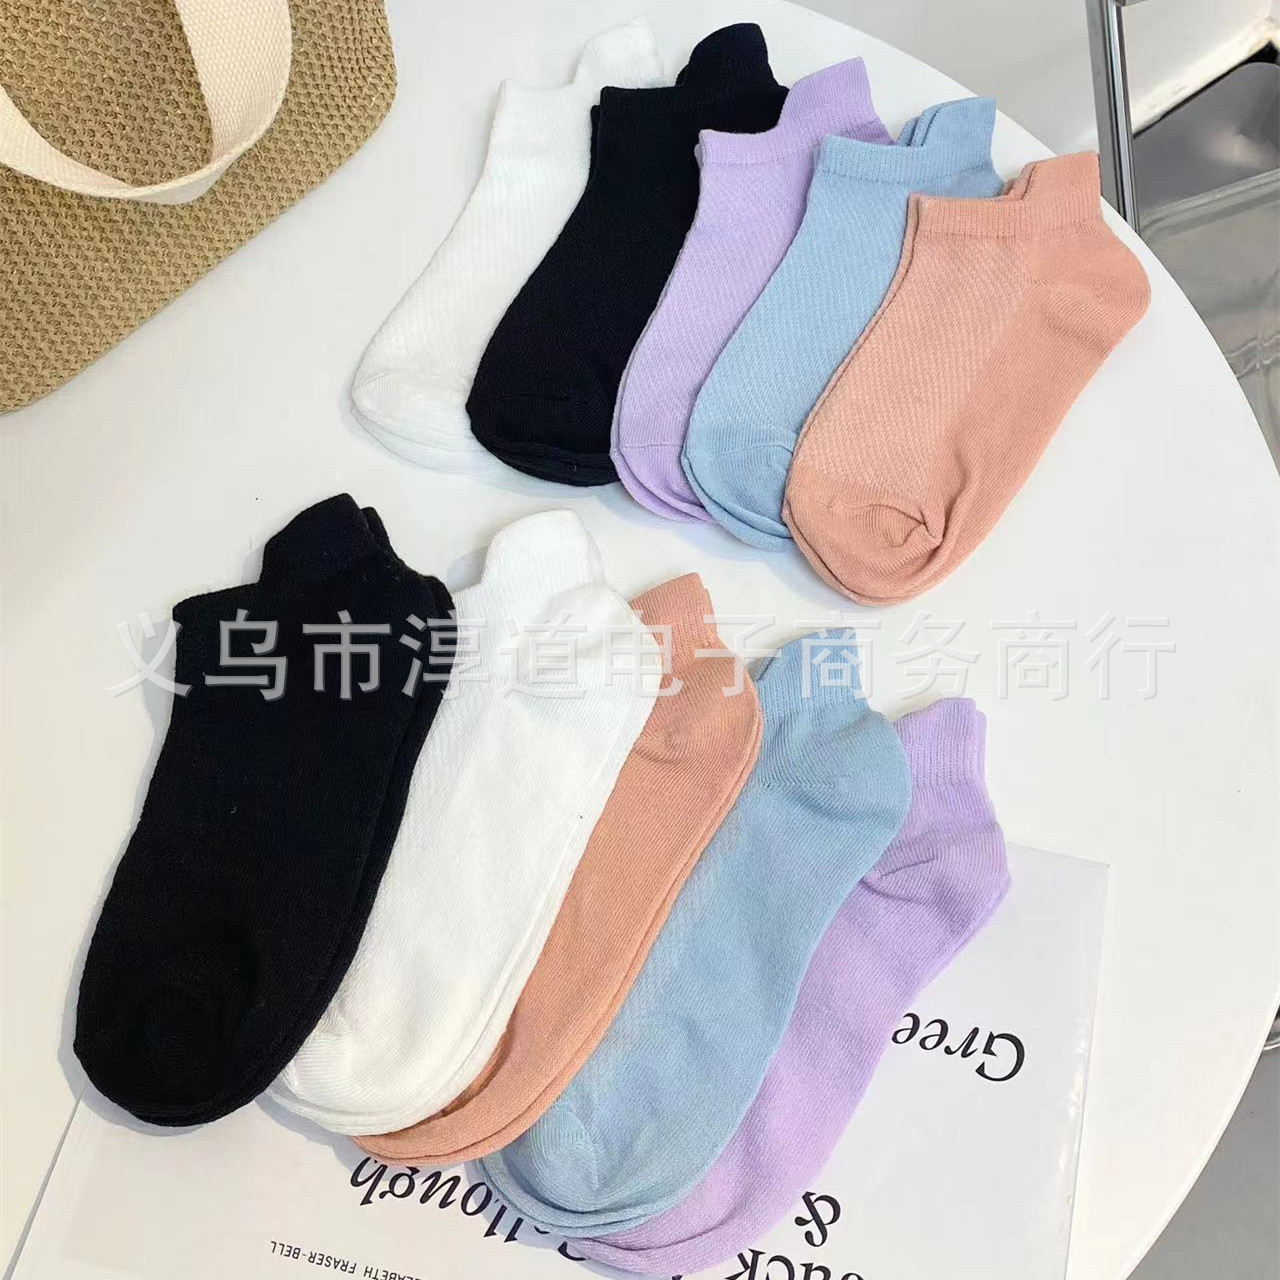 Non-Printed Style Solid Color Couple Mesh Stockings Combed Cotton Men and Women Comfortable Cotton Boat Socks Candy Color Socks Short Tube Boat Socks